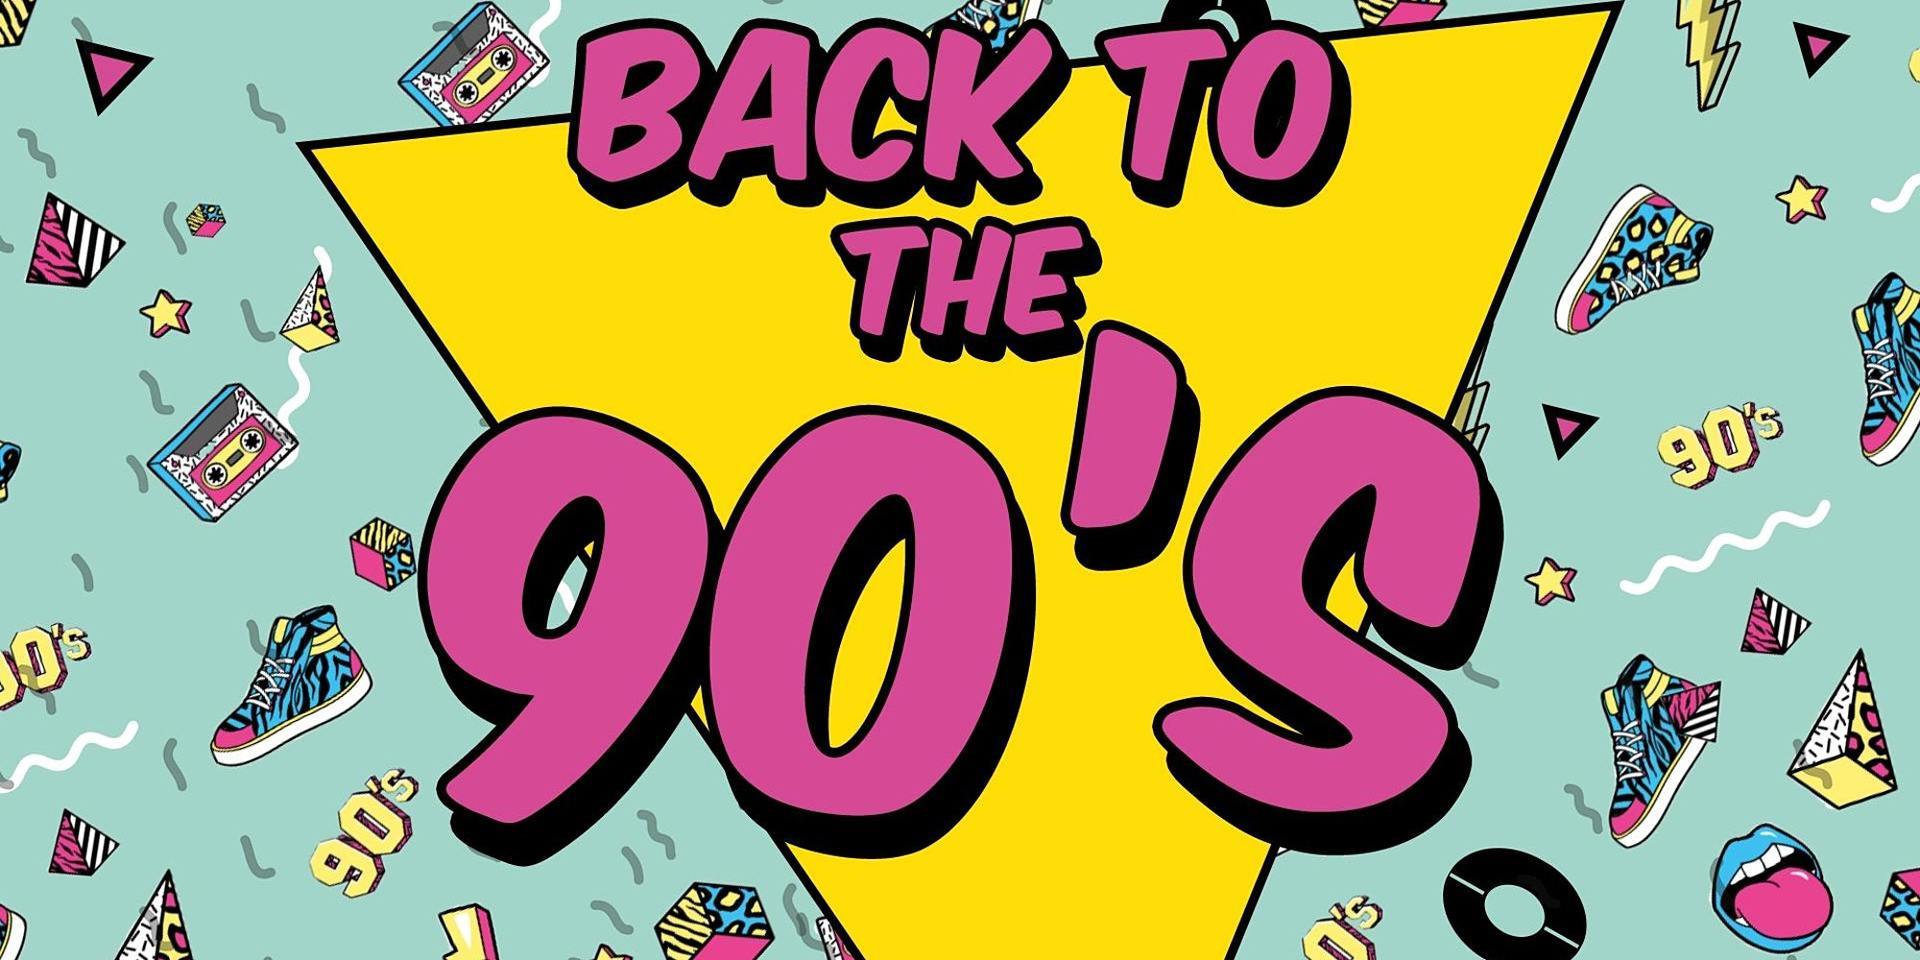 Back to The 90s Vol 6 W/ Pearl Jam, Foo Fighters and Sublime Live!, Aurora, Illinois, United States